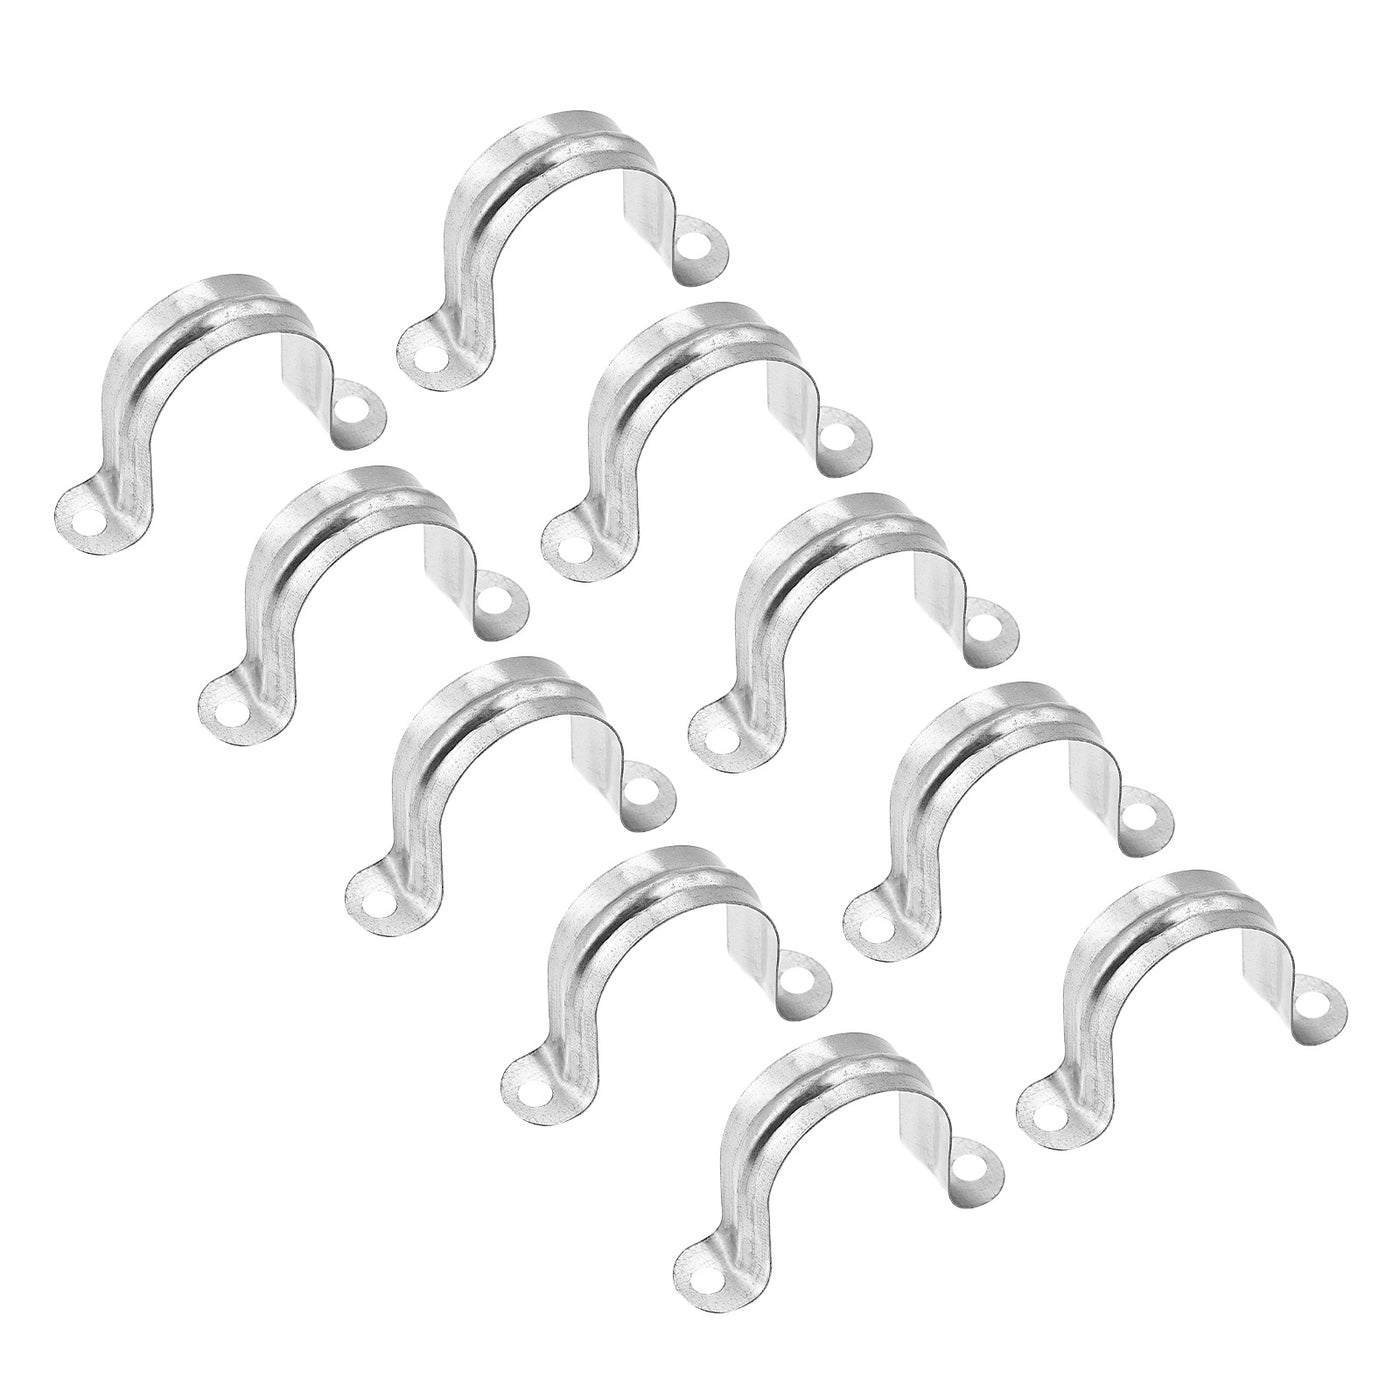 uxcell Uxcell Rigid Pipe Strap 16pcs 1 1/4" (32mm) Carbon Steel U Bracket Tension Tube Clamp